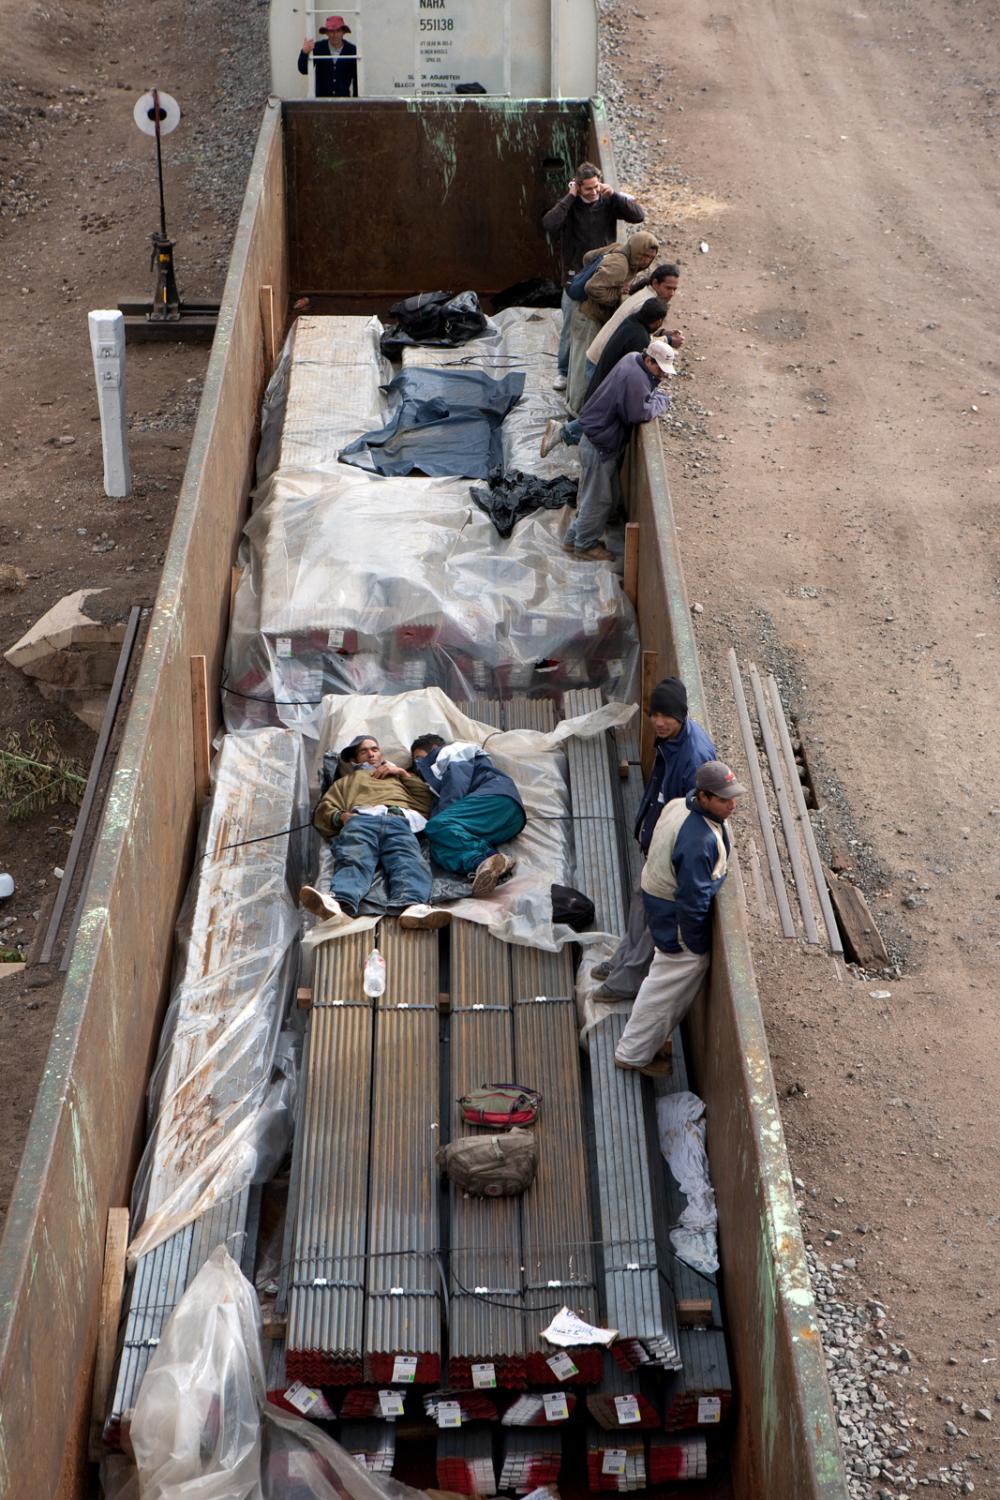 MEXICO Central America migrants travel on a freight train heading north in Zacatecas state on June 10, 2018. The journey from Central America to the U.S.-Mexico border is dangerous and long with no assurance they will make it to their destination.